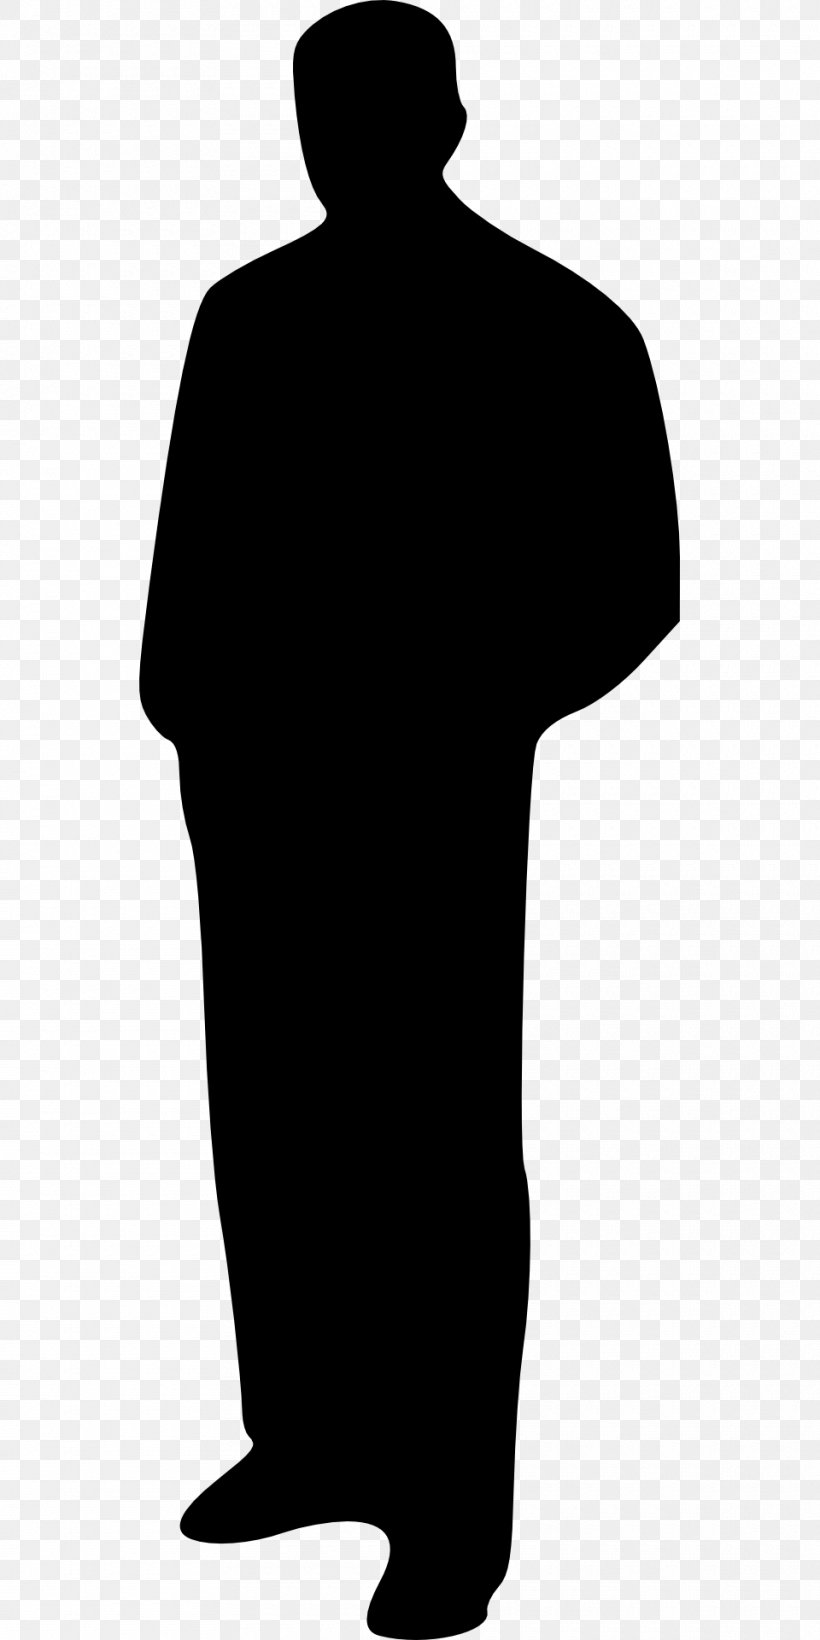 Vector Graphics Businessperson Image Silhouette, PNG, 960x1920px, Businessperson, Black, Clothing, Jersey, Logo Download Free